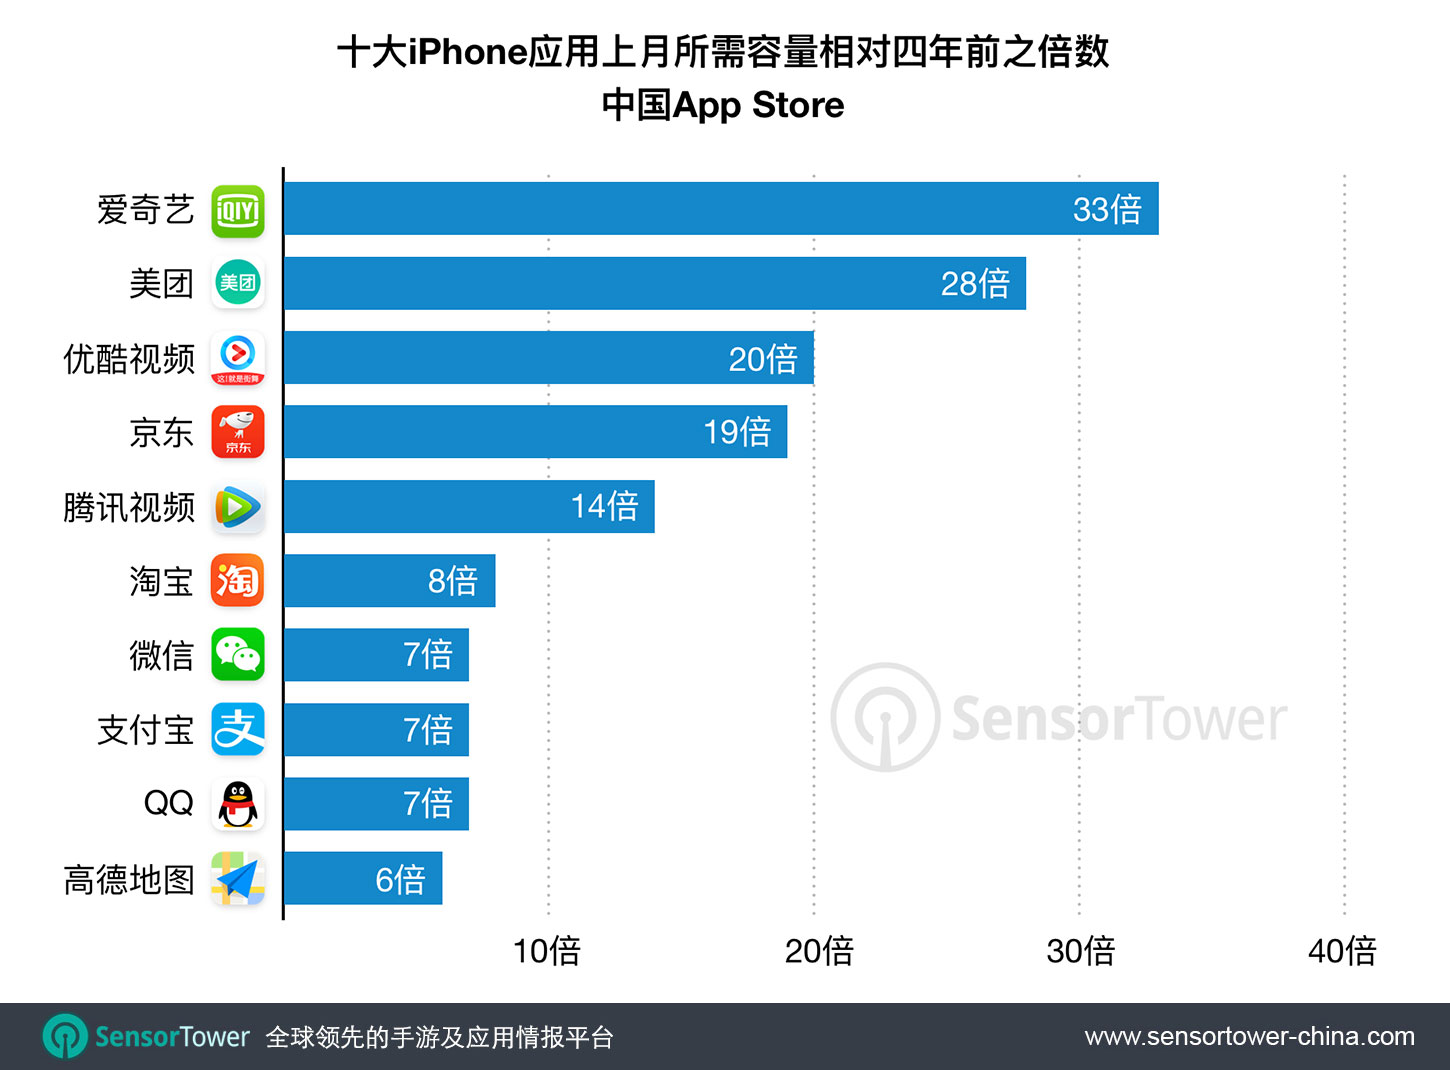 Chinese Top iPhone Apps Size by Growth